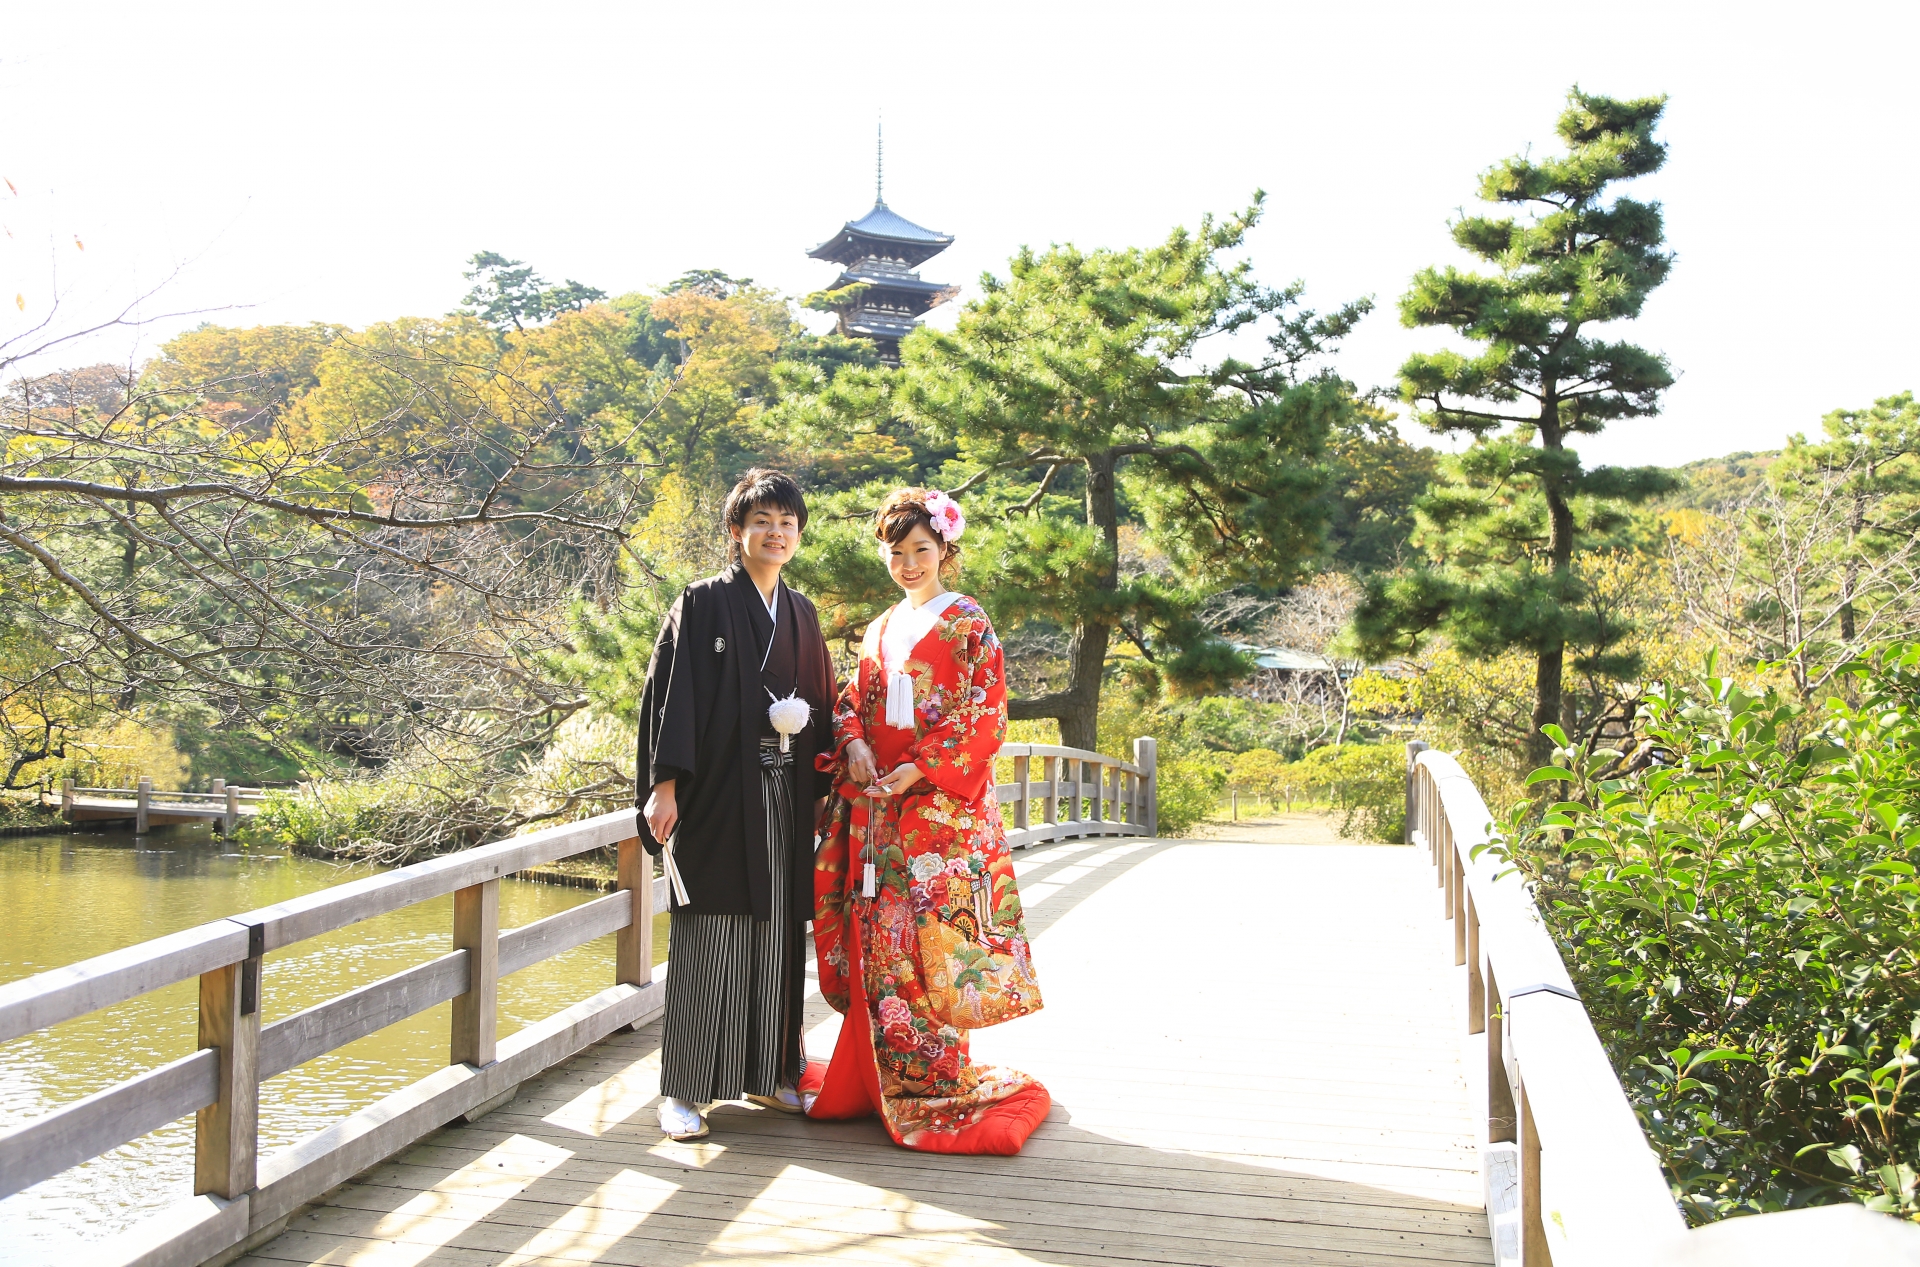 Japanese Traditional Wedding: All You Need to Know | Japan Wonder